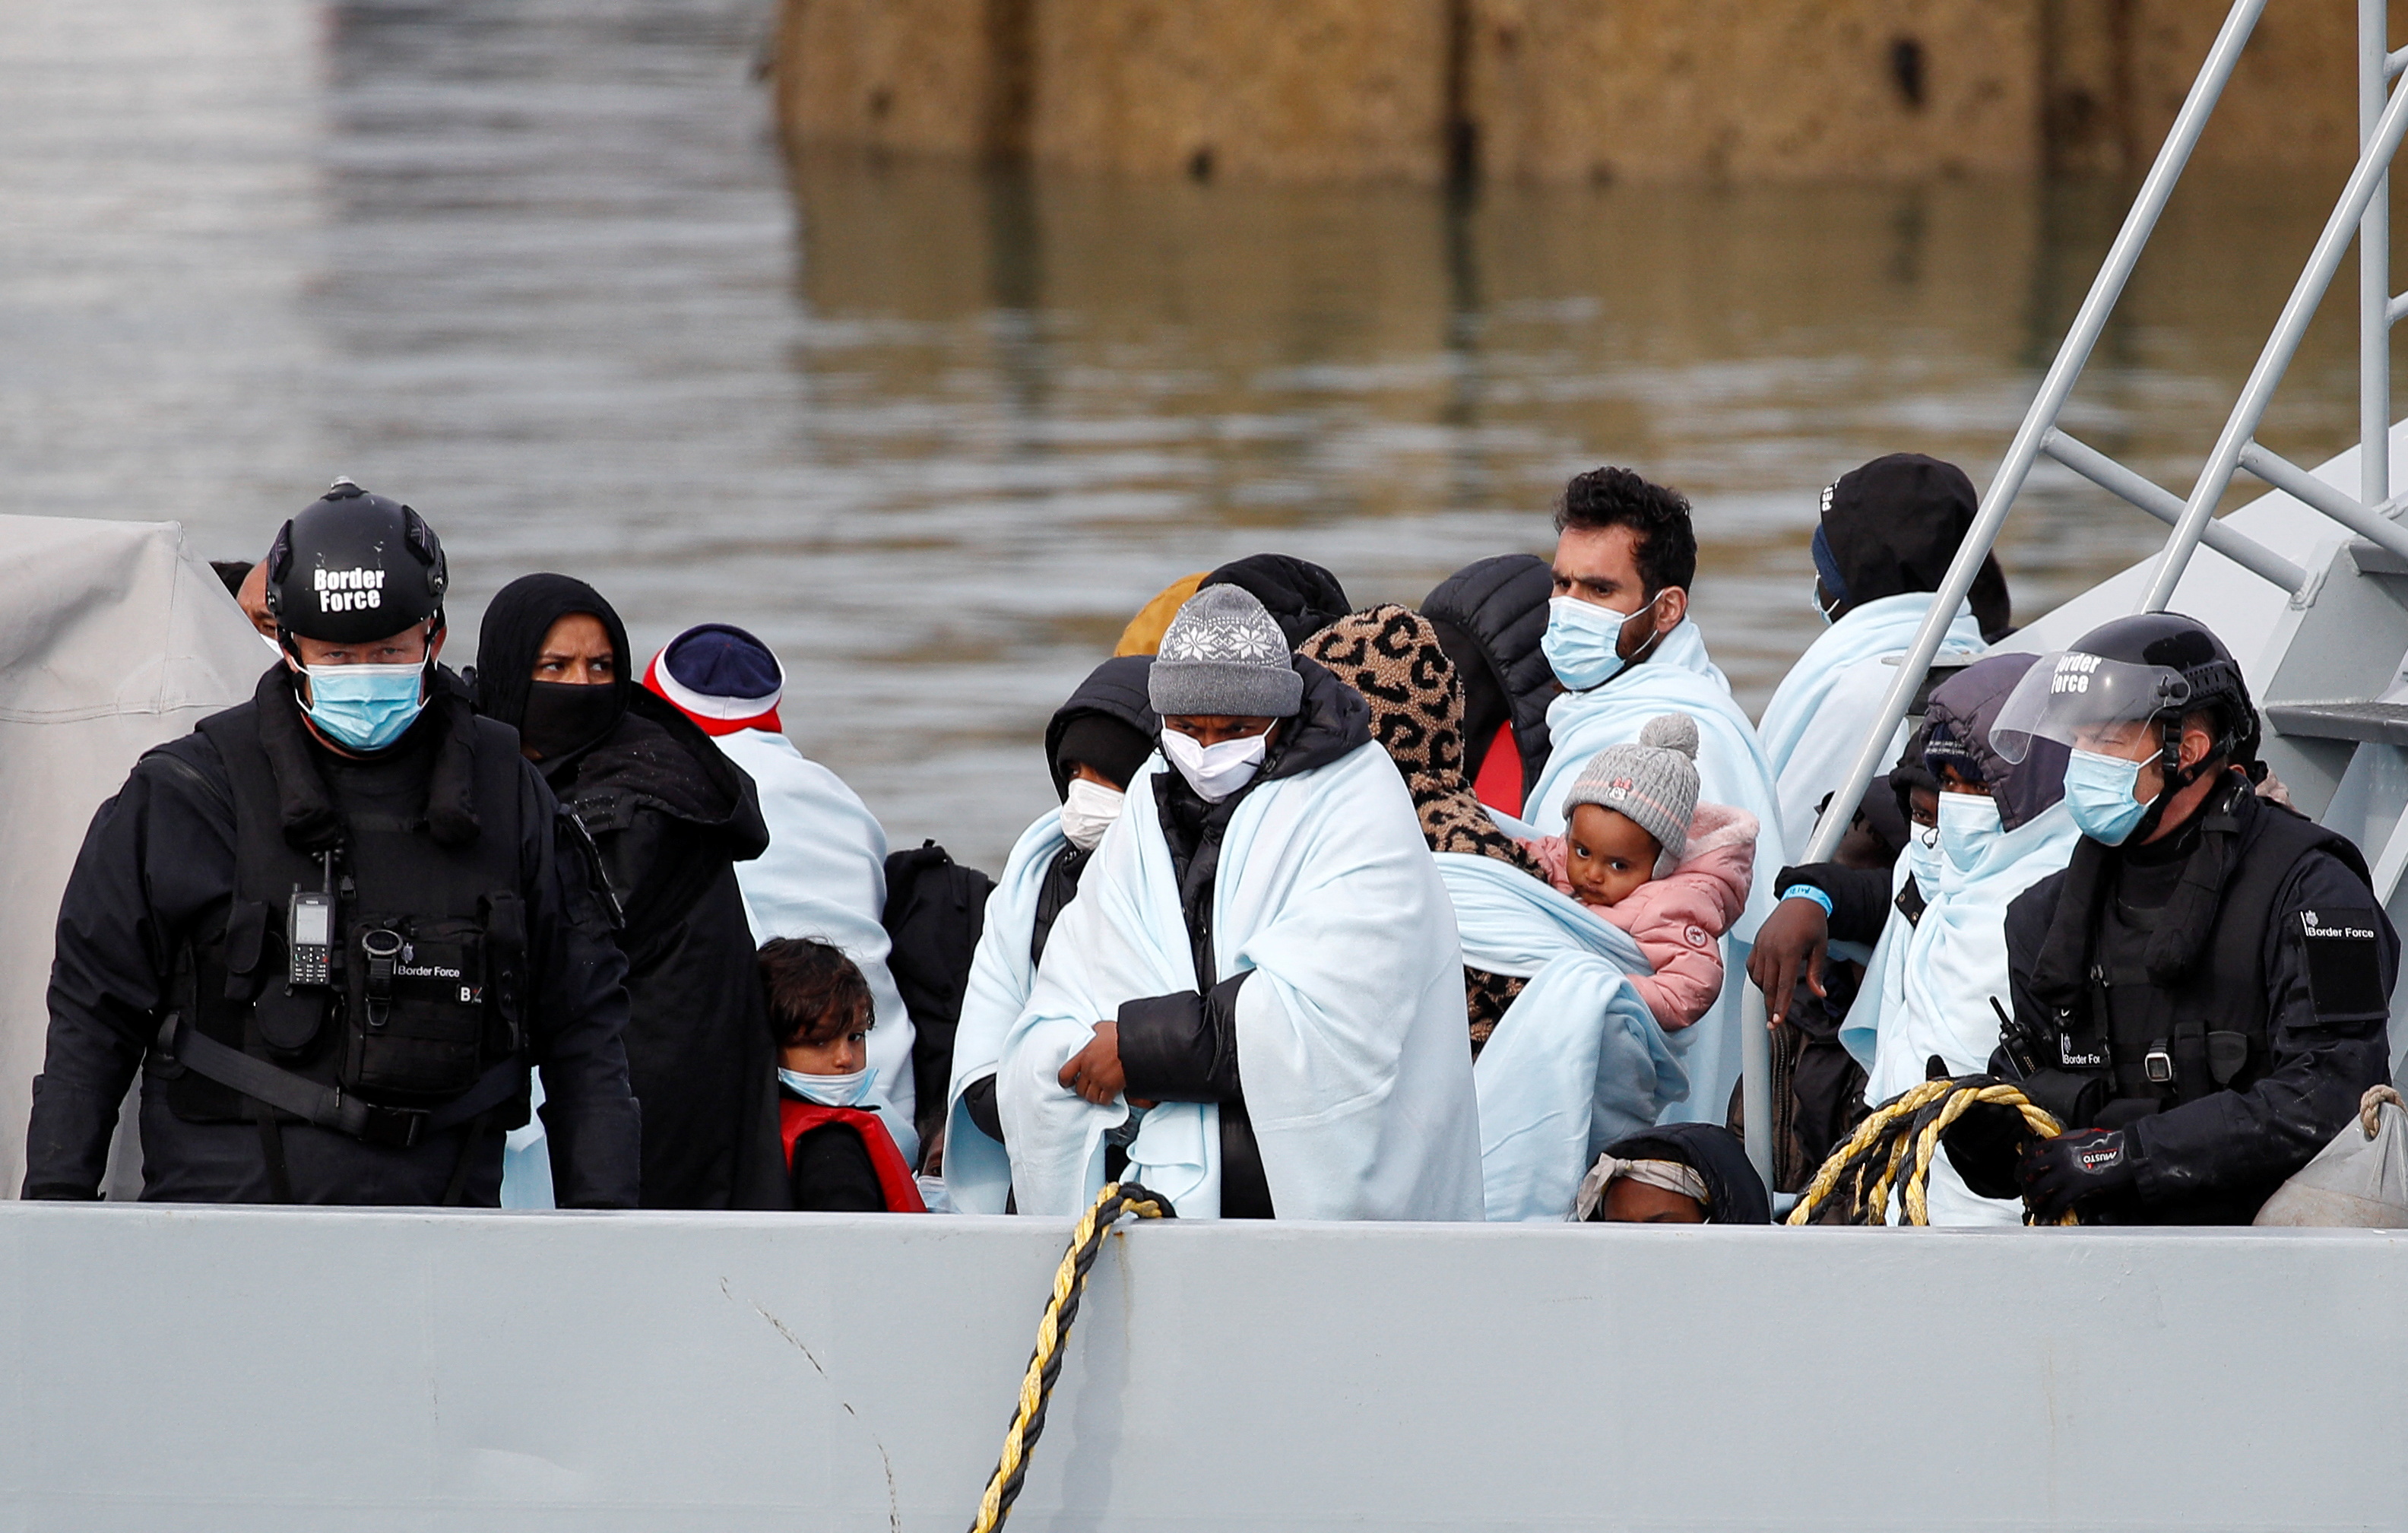 Migrants arrive in Dover after being rescued while crossing the English Channel